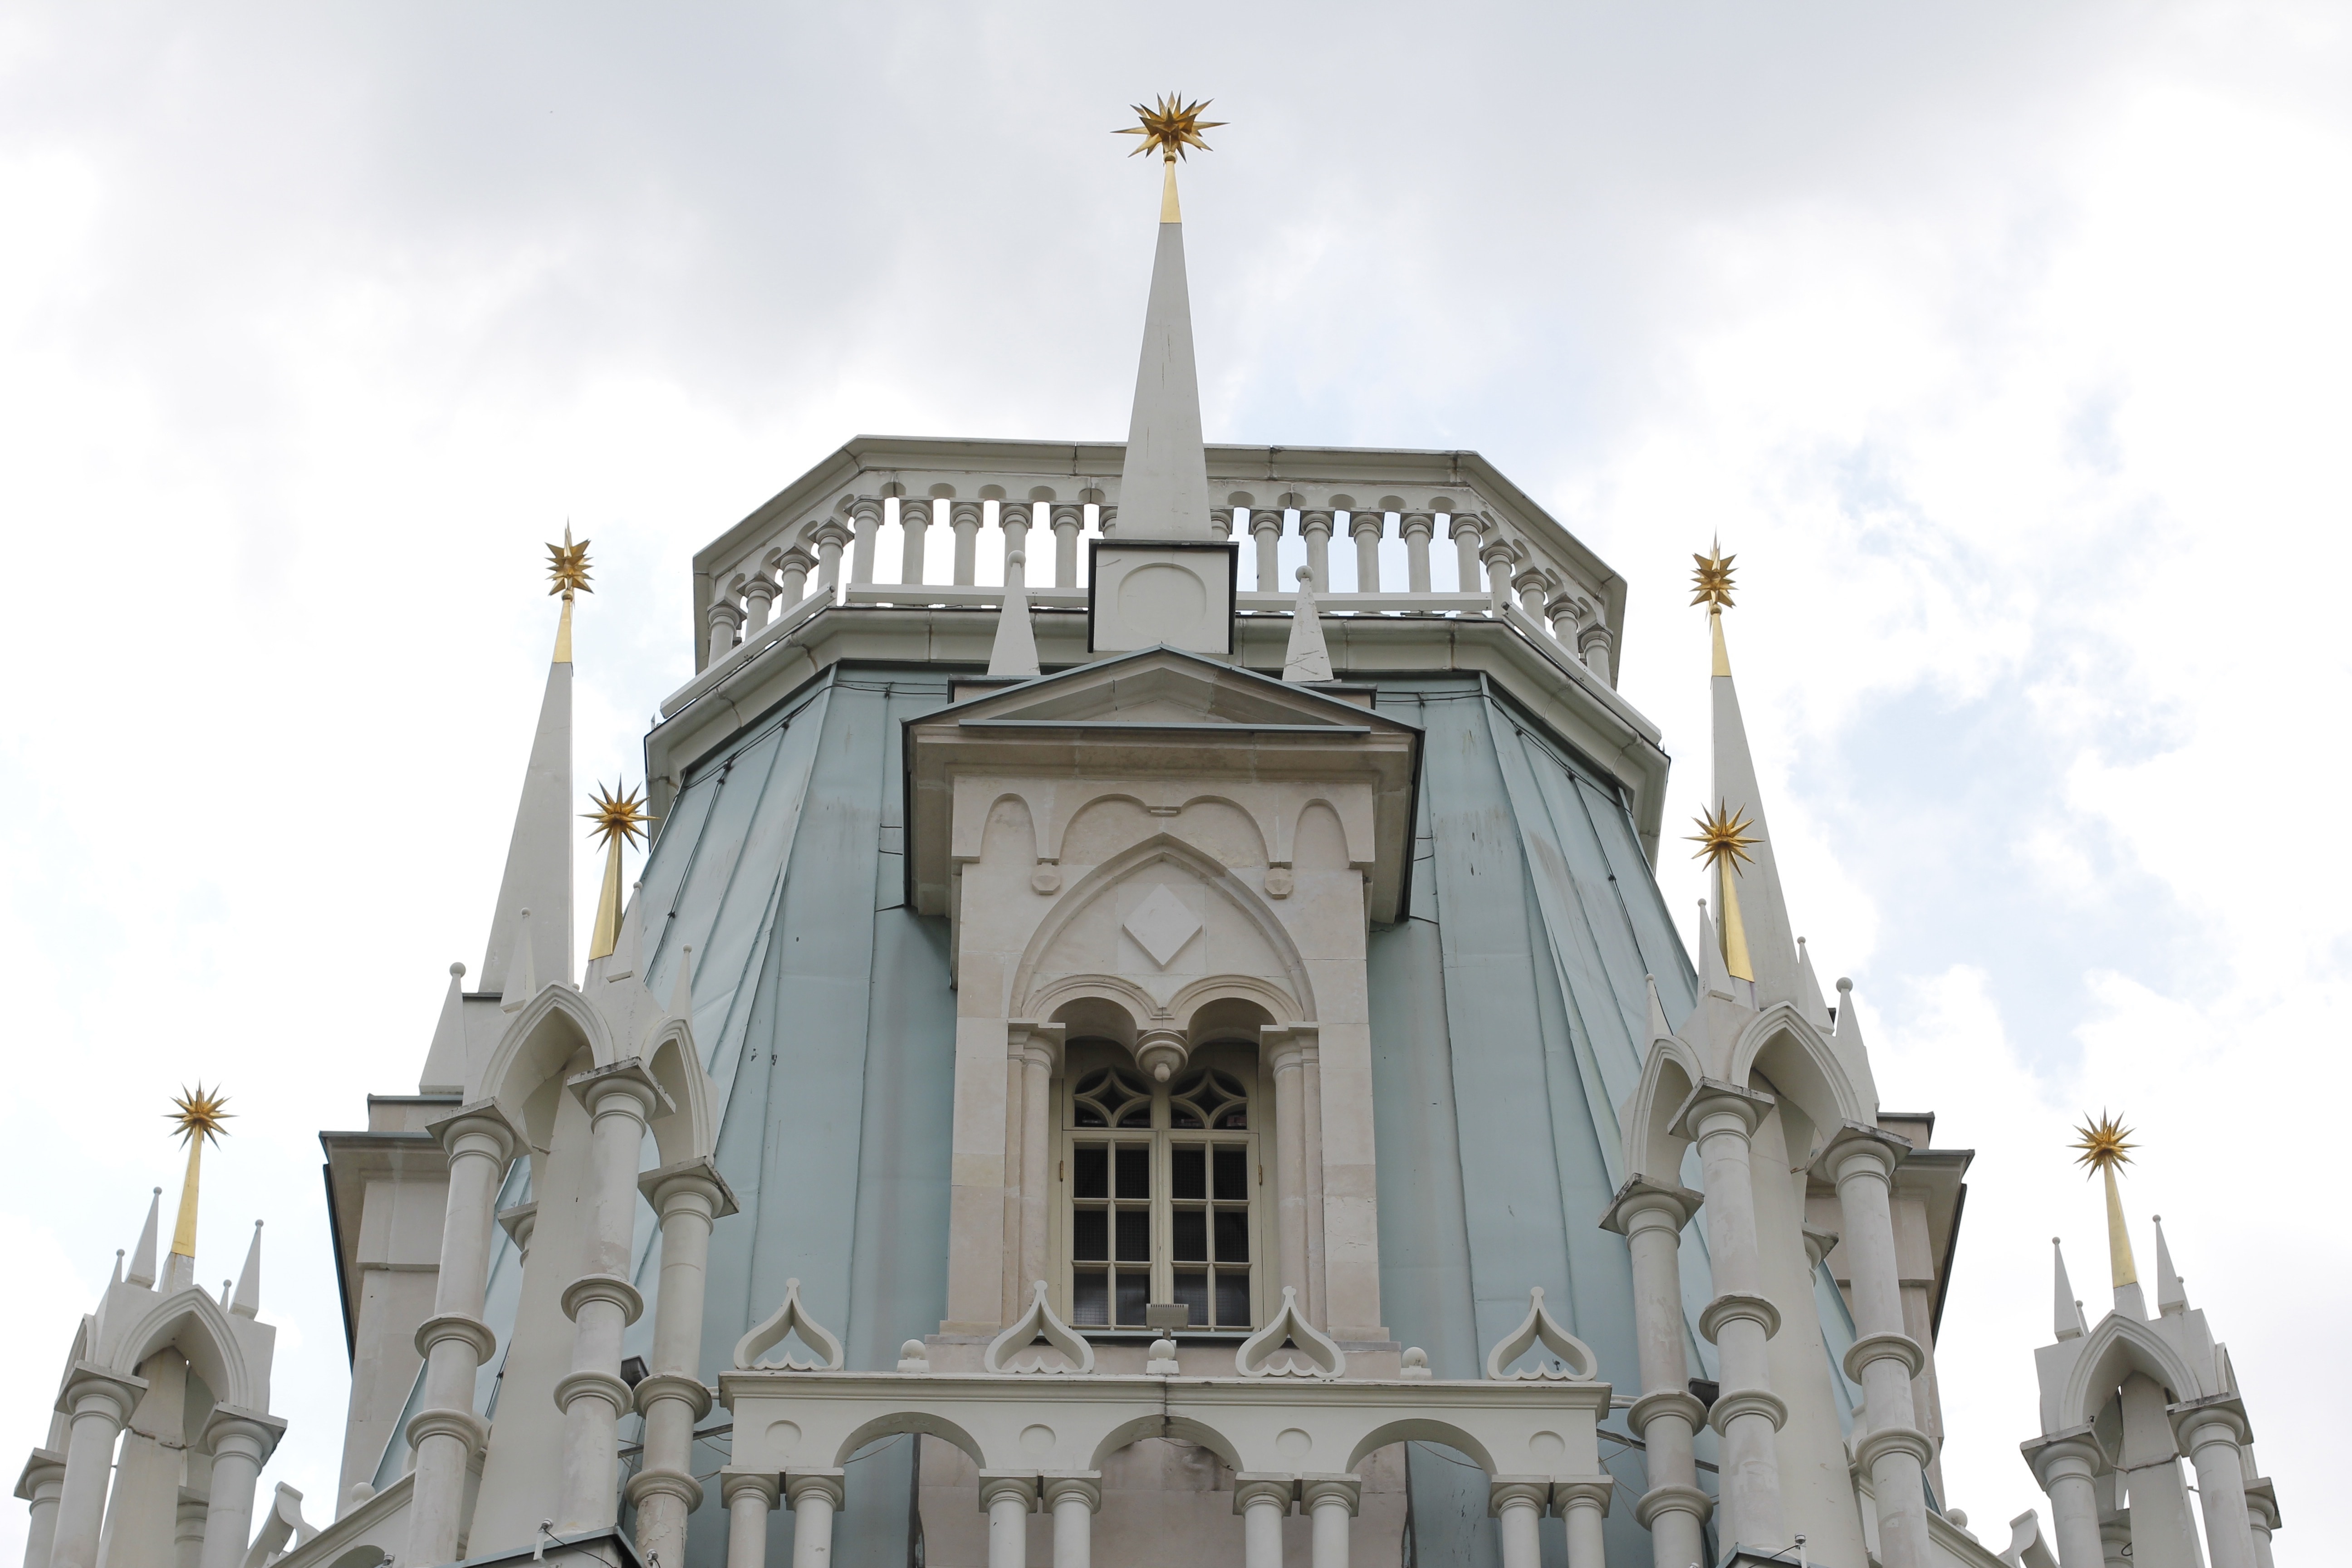 teal and white painted cathedral